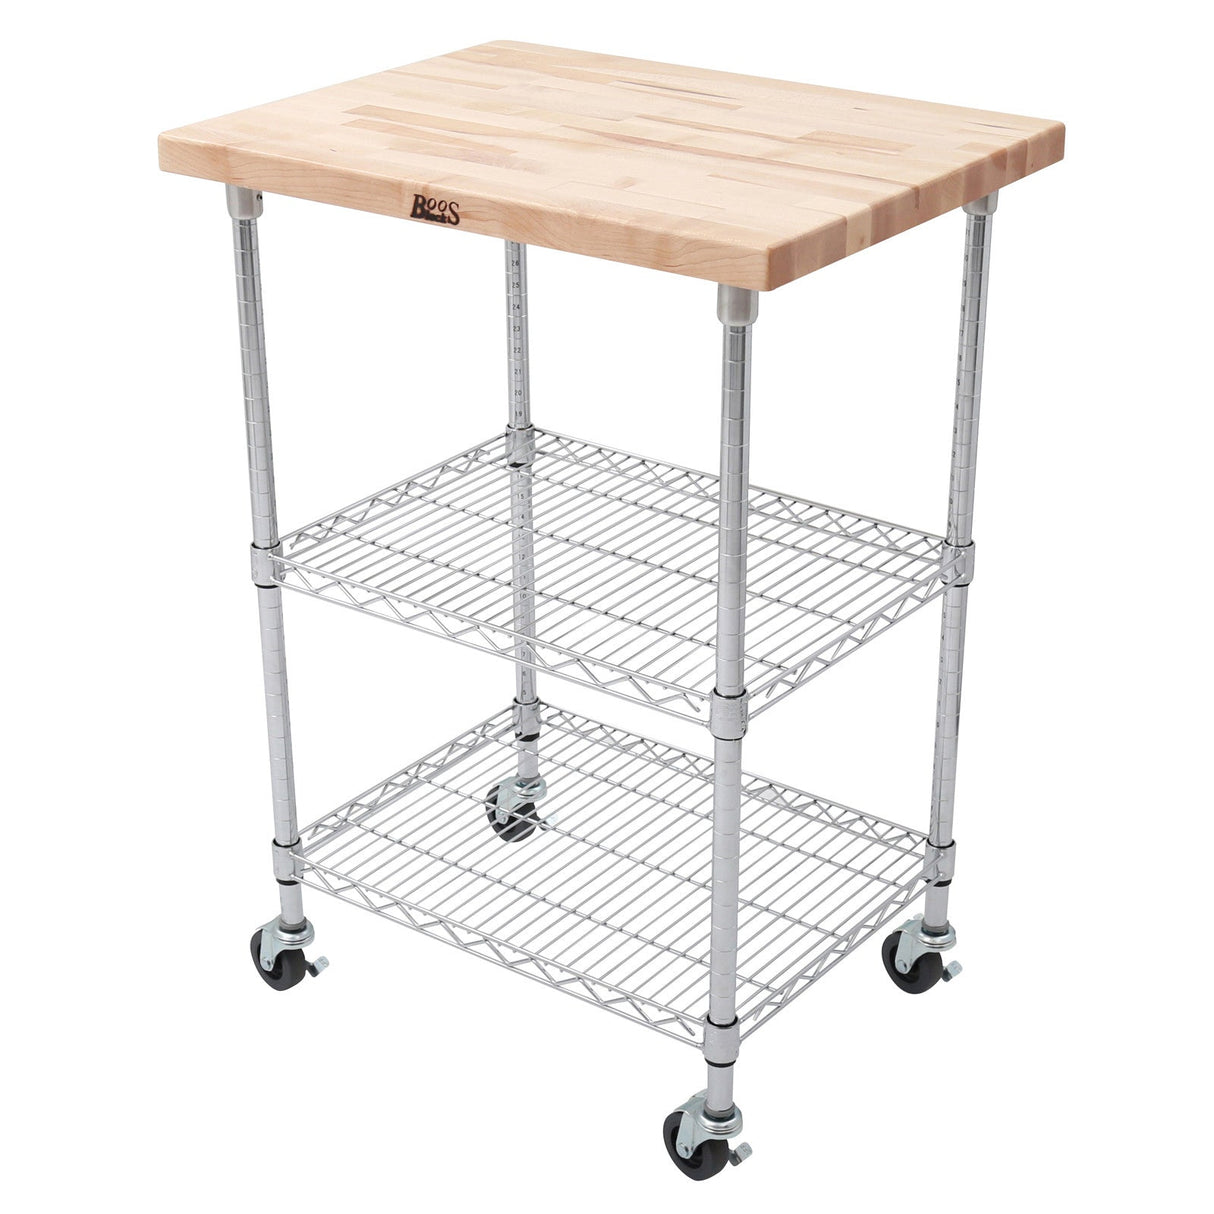 John Boos MET-MWC-1 Metropolitan Mobile Wire Cart with Maple Top, 27” Long, 21” Wide, 36" Height